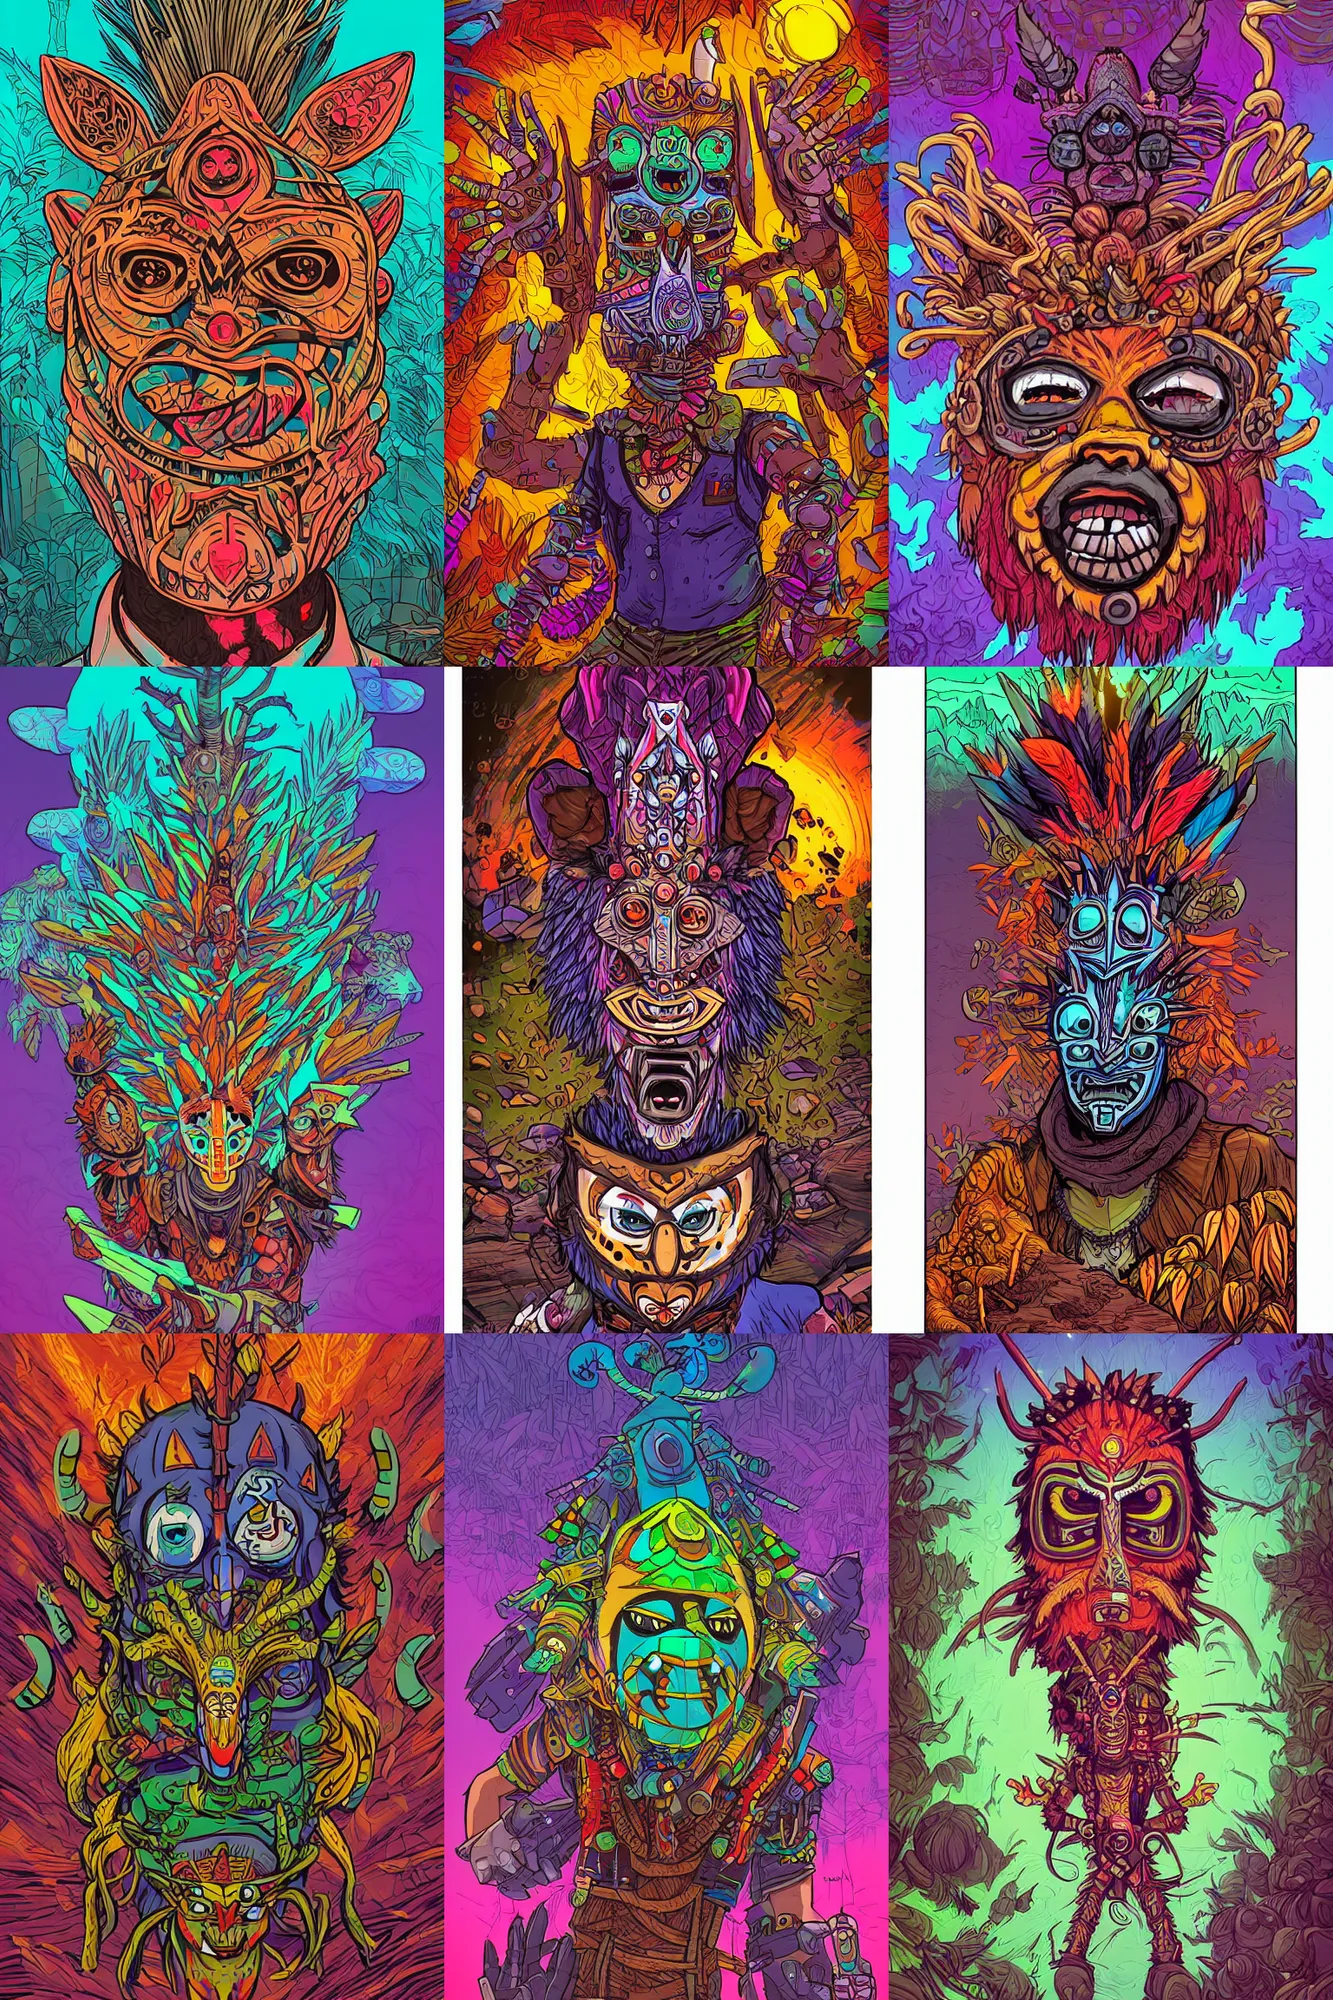 Prompt: a person dressed up as a totem animal tribal chaman vodoo mask feather gemstone plant wood rock video game illustration vivid color borderlands by josan gonzales and dan mumford radiating a glowing aura